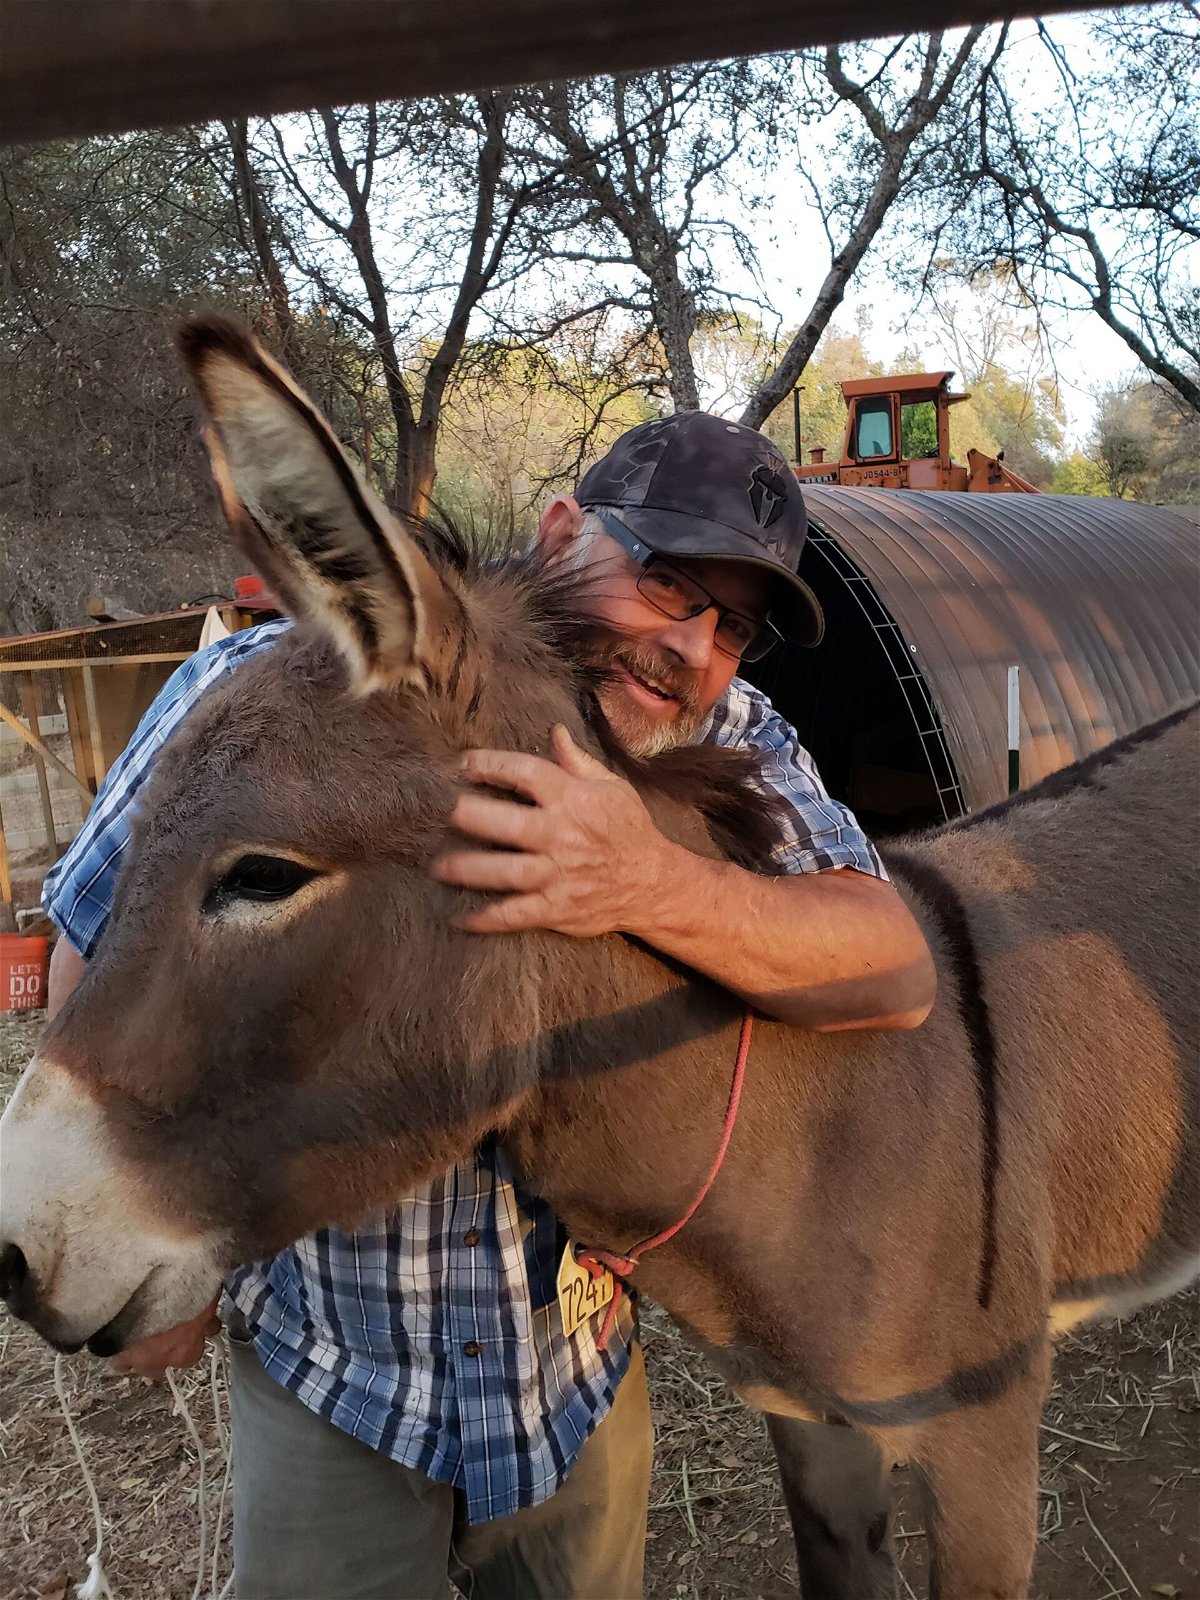 <i>Courtesy Terrie and Dave Drewry via CNN Newsource</i><br/>Dave Drewry's pet donkey